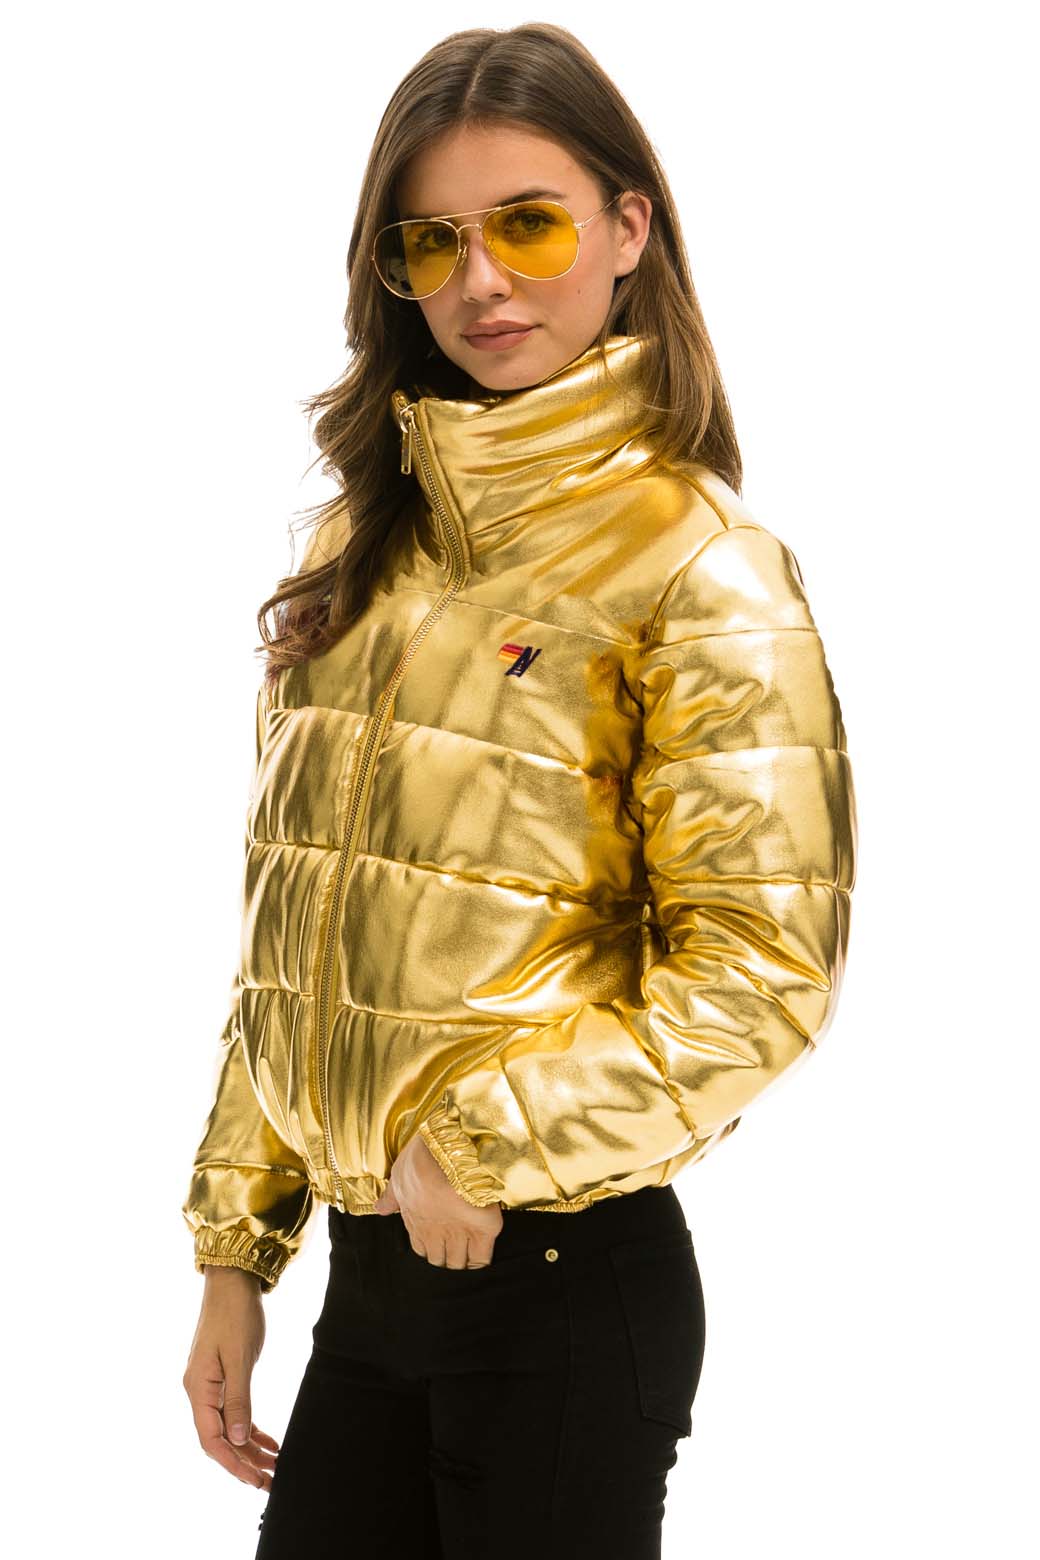 Throw Your Boring Black Jacket in the Garbage, and Wear One of These 11  Metallic Styles Instead | Metallic jacket, Puffer jacket outfit, Silver  puffer jacket